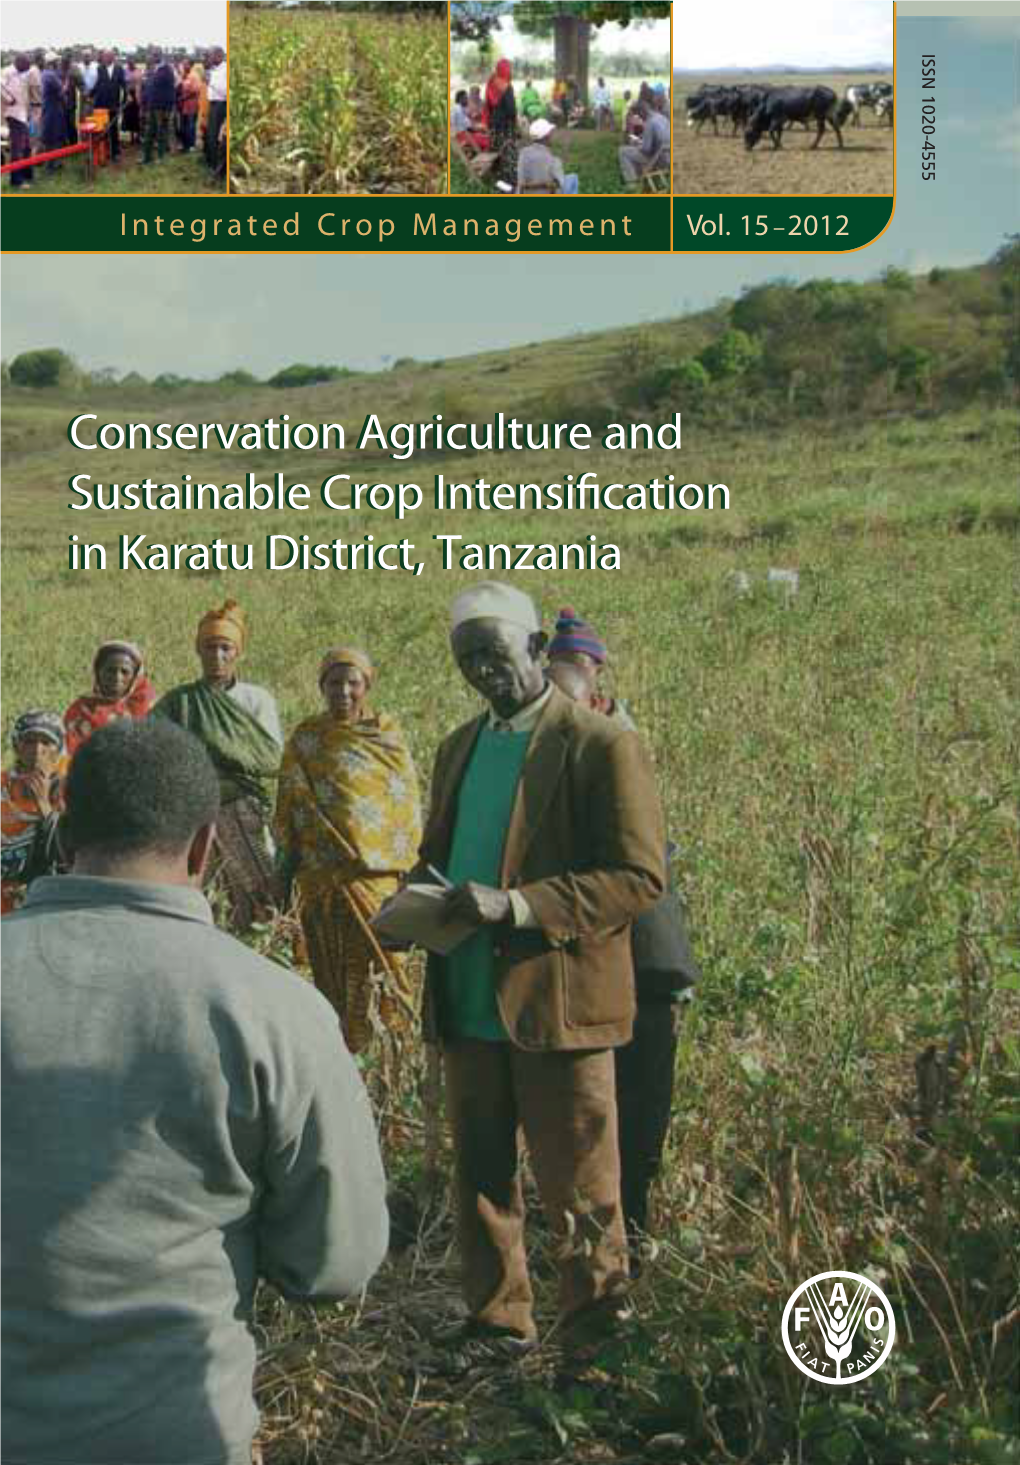 ICM 15. Conservation Agriculture and Sustainable Crop Intensification in Karatu District, Tanzania